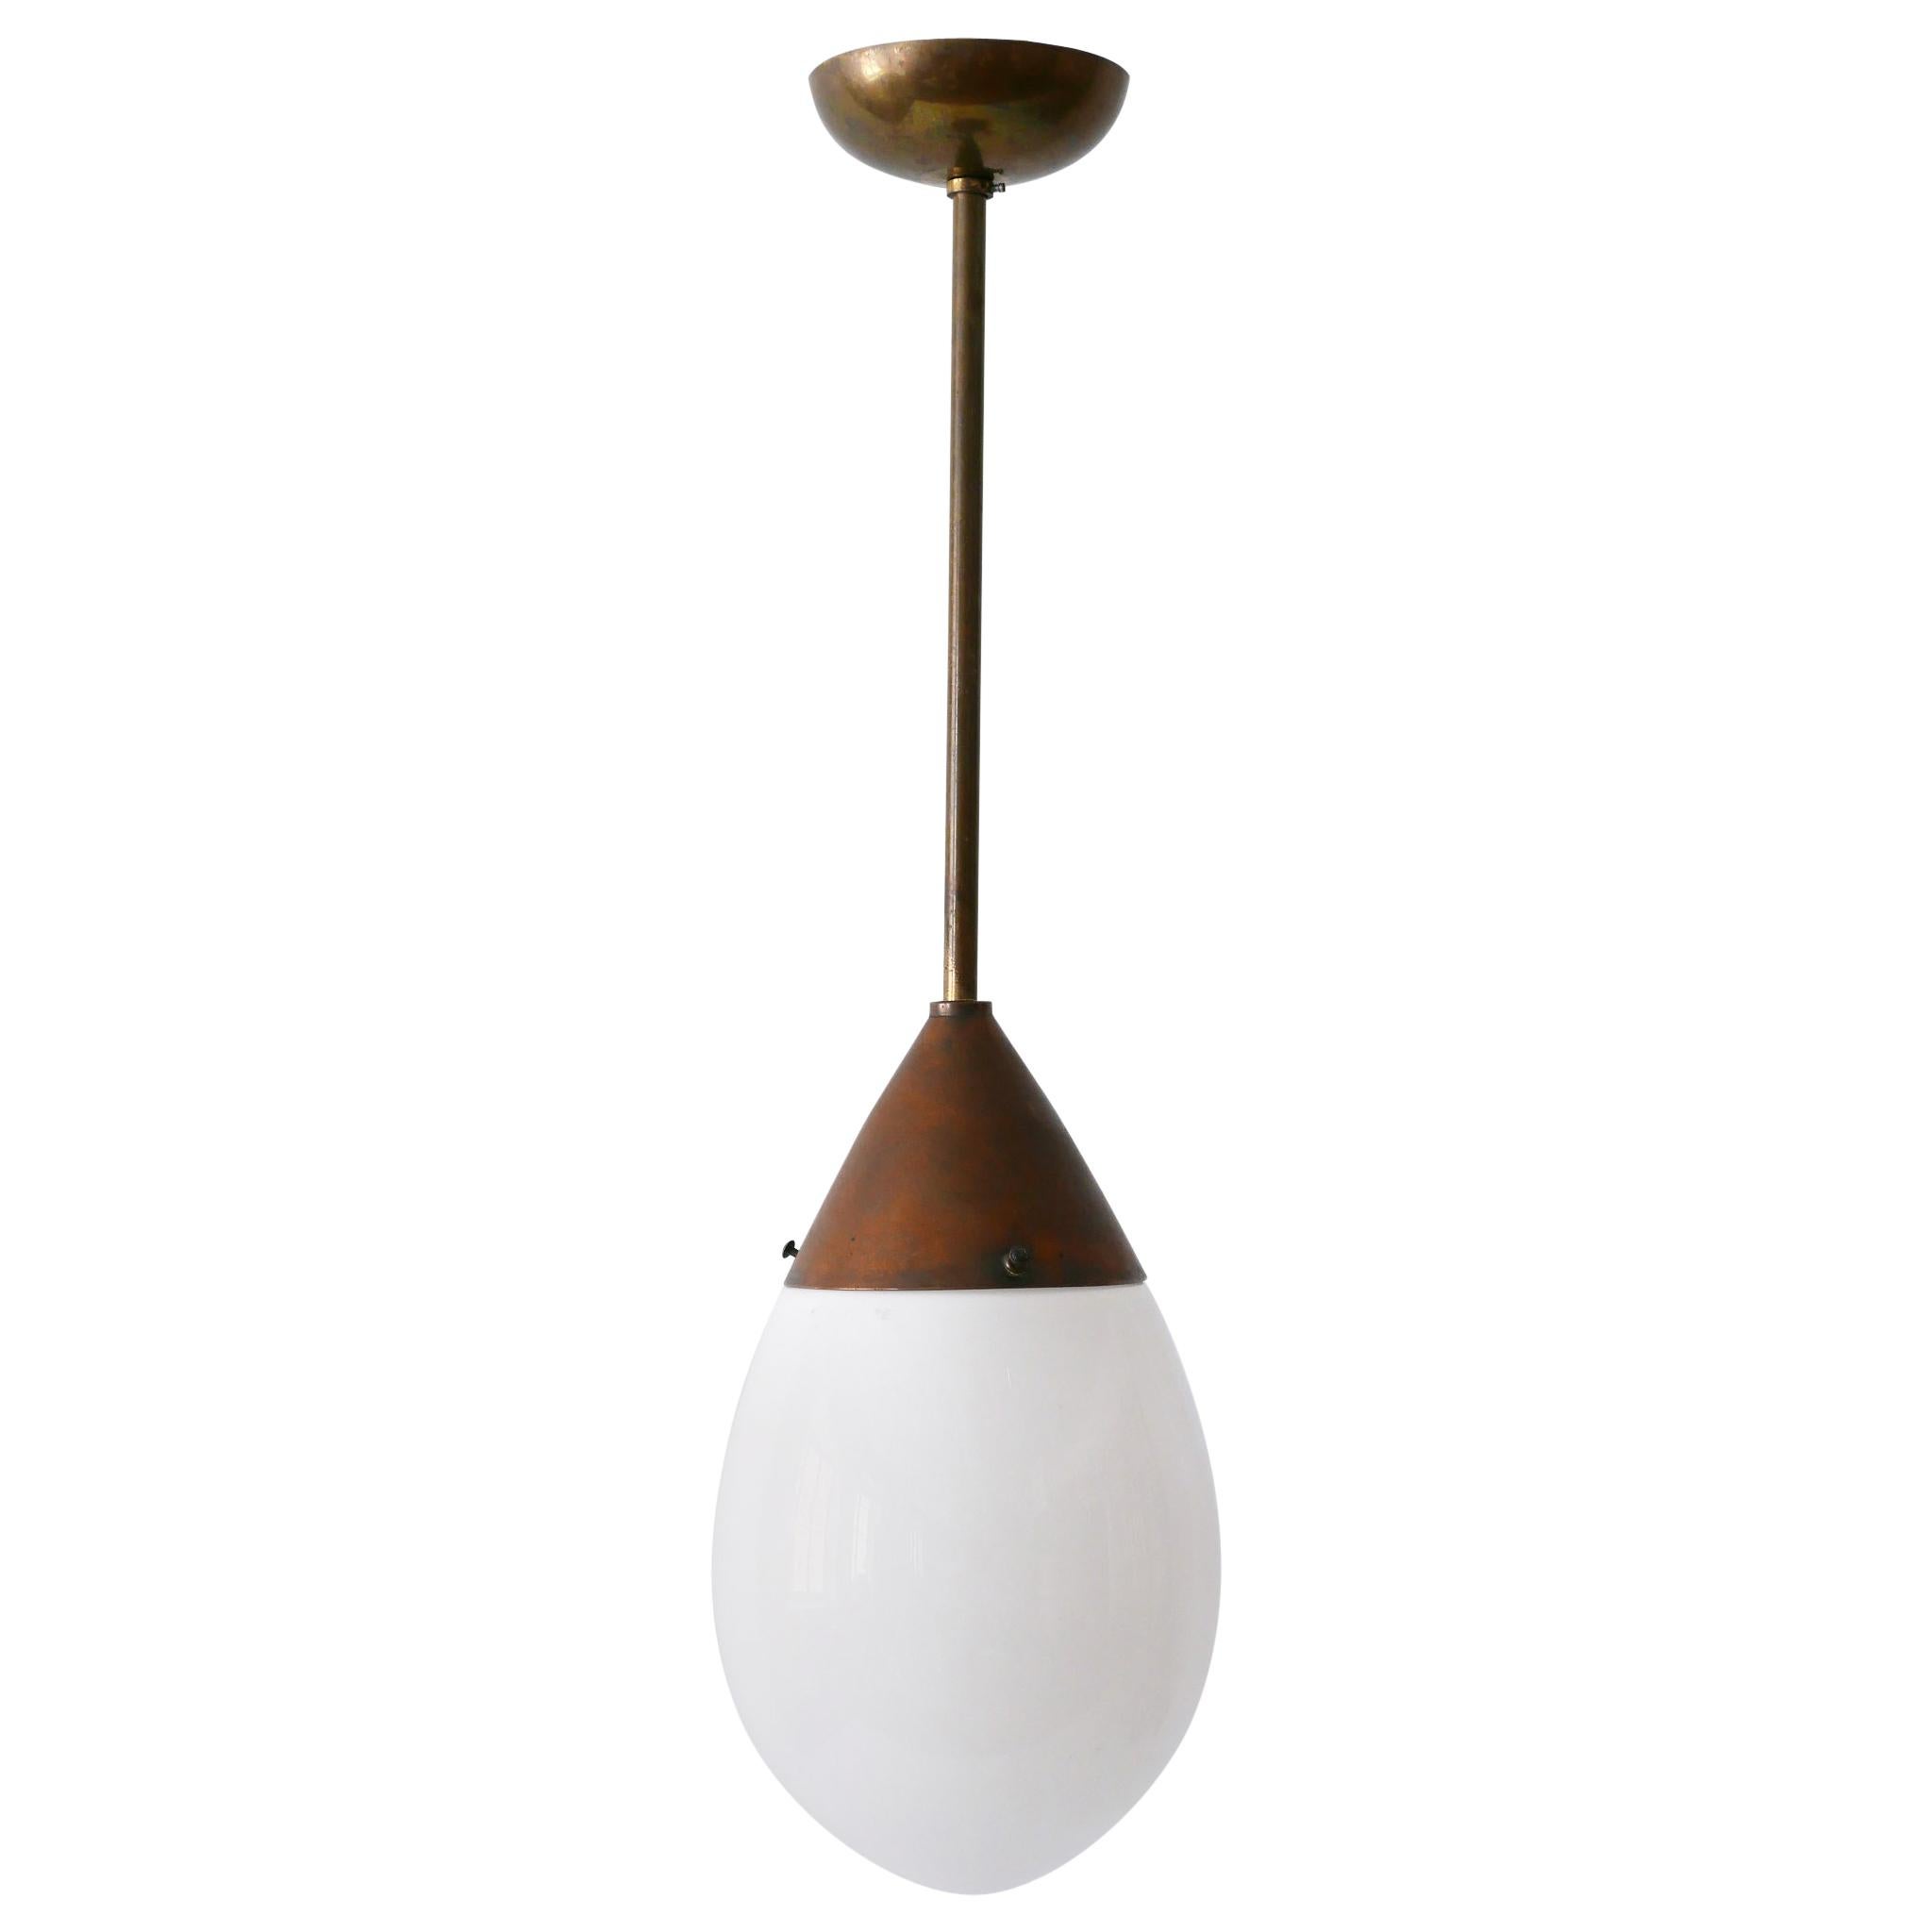 Exceptional Bauhaus Pendant Lamp or Hanging Light Drop by Siemens 1920s, Germany For Sale